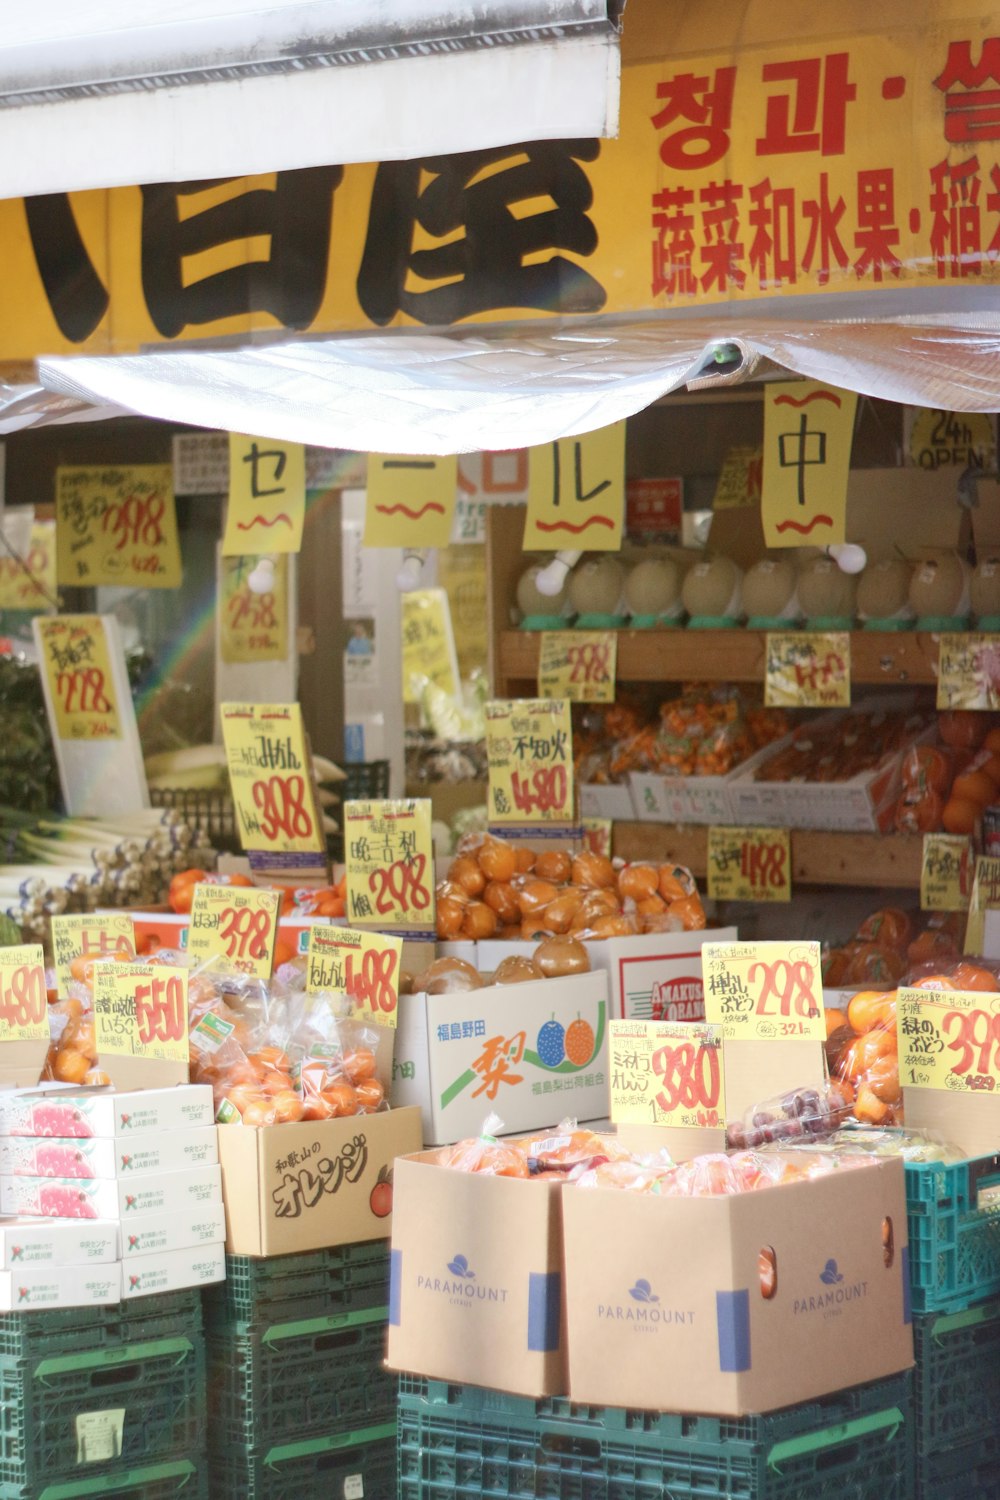 a fruit stand with boxes of oranges for sale